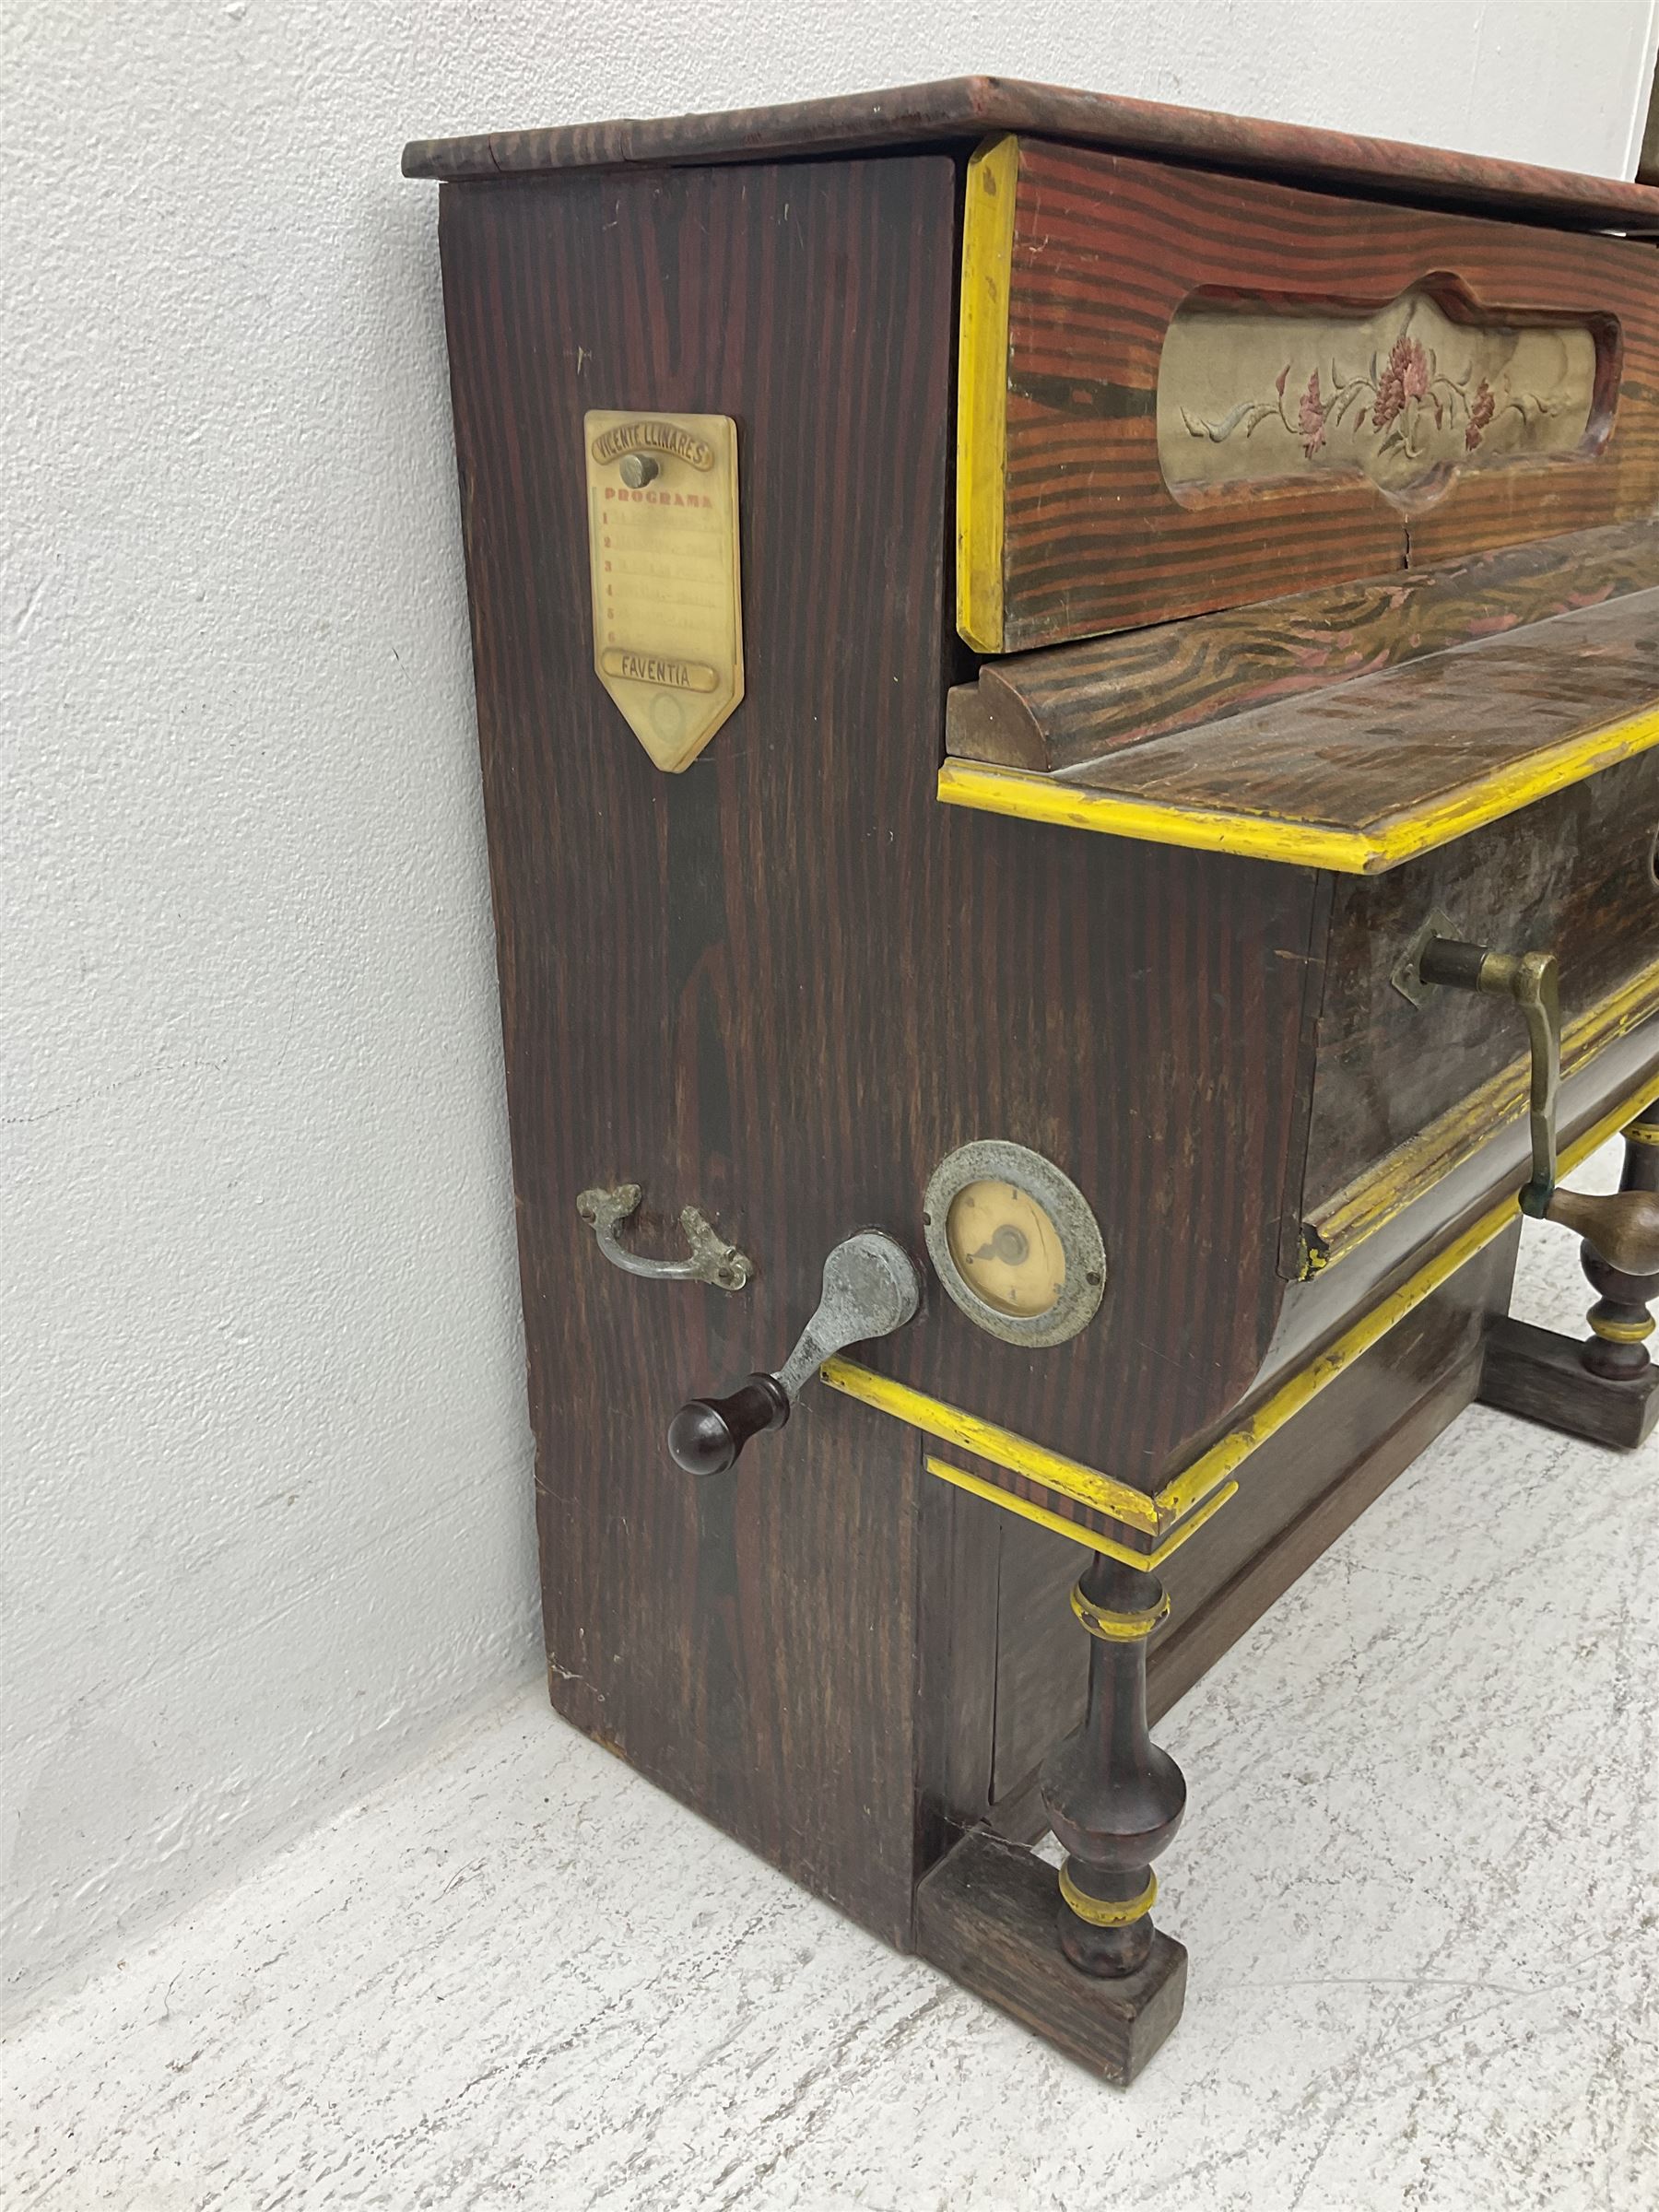 Faventia Half size miniature Spanish barrel piano with a 40cm cylinder playing tunes on a 37 note mo - Image 12 of 15